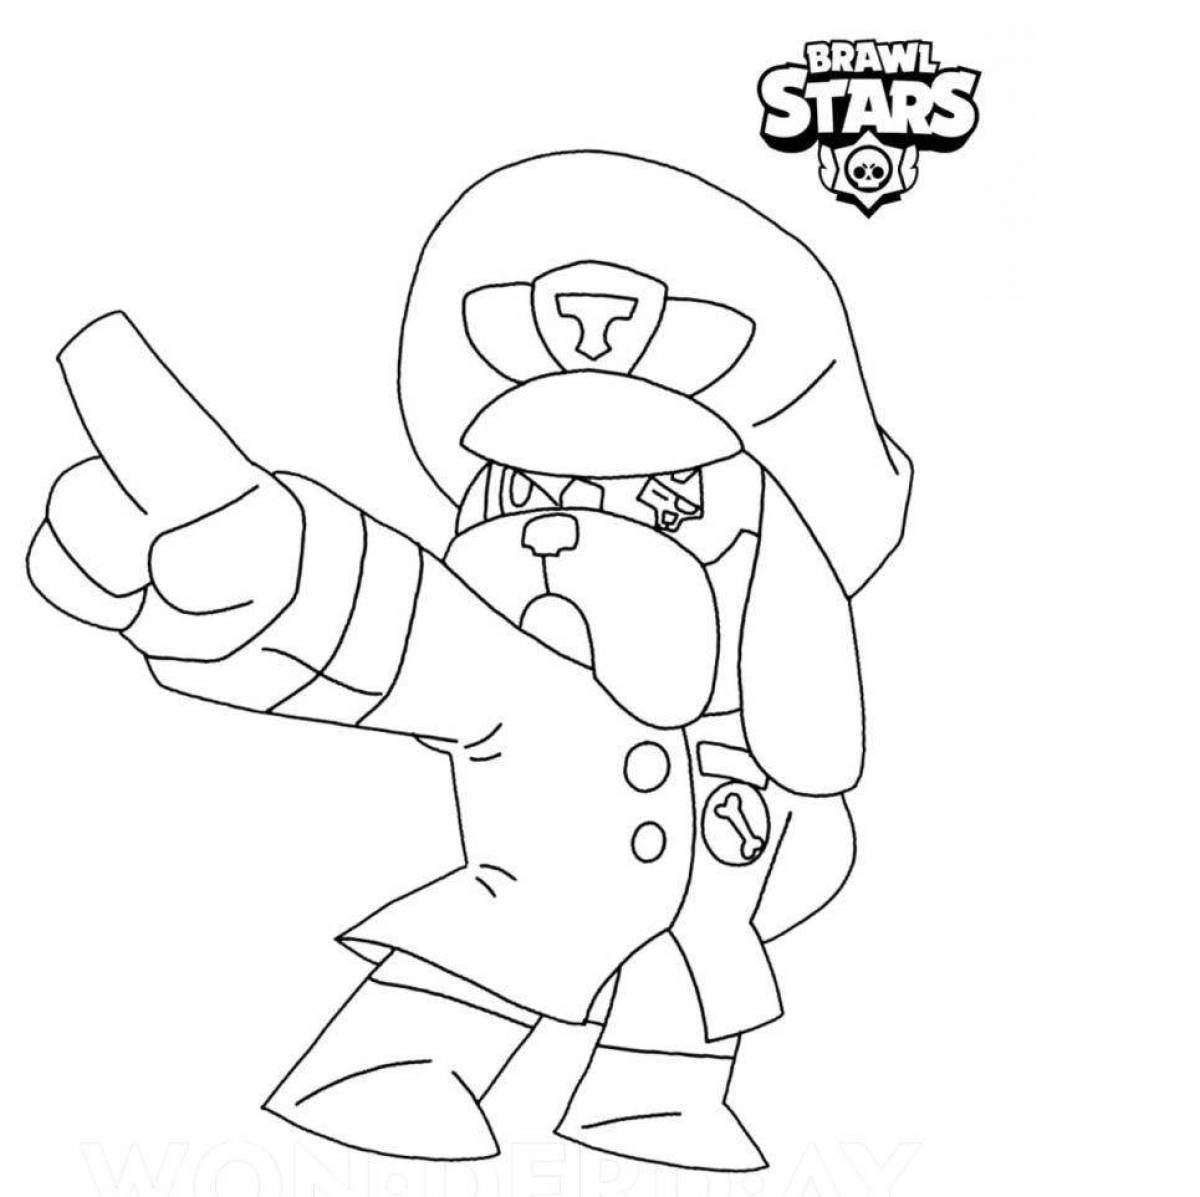 Sam from brawl stars live coloring